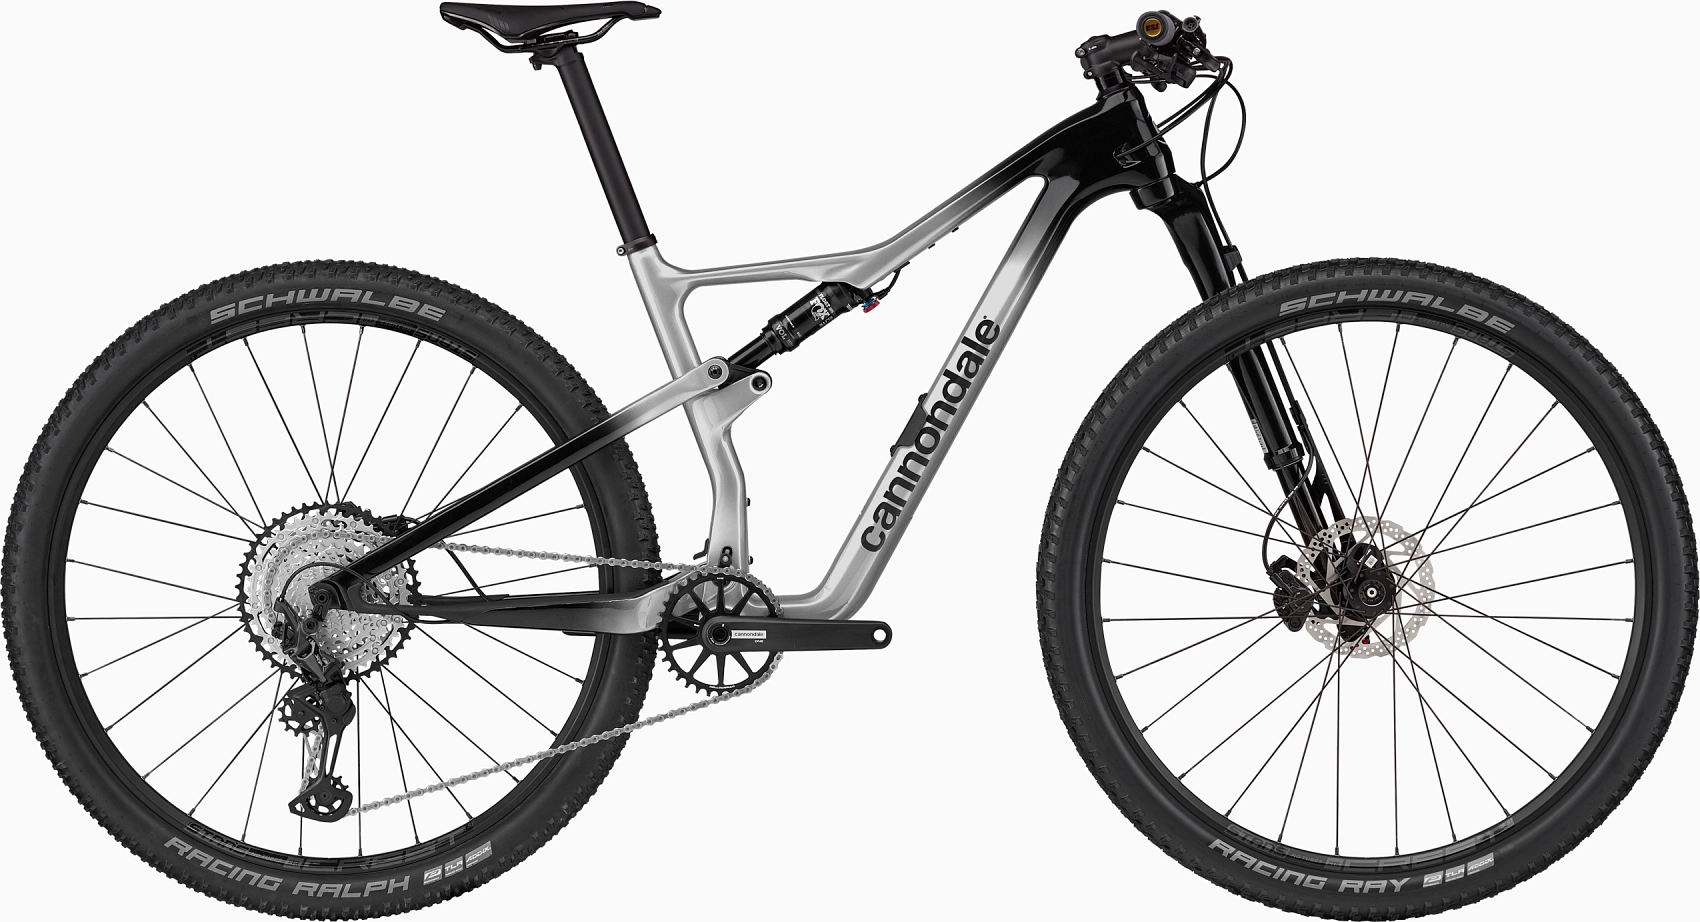 Cannondale Scalpel Crb 3